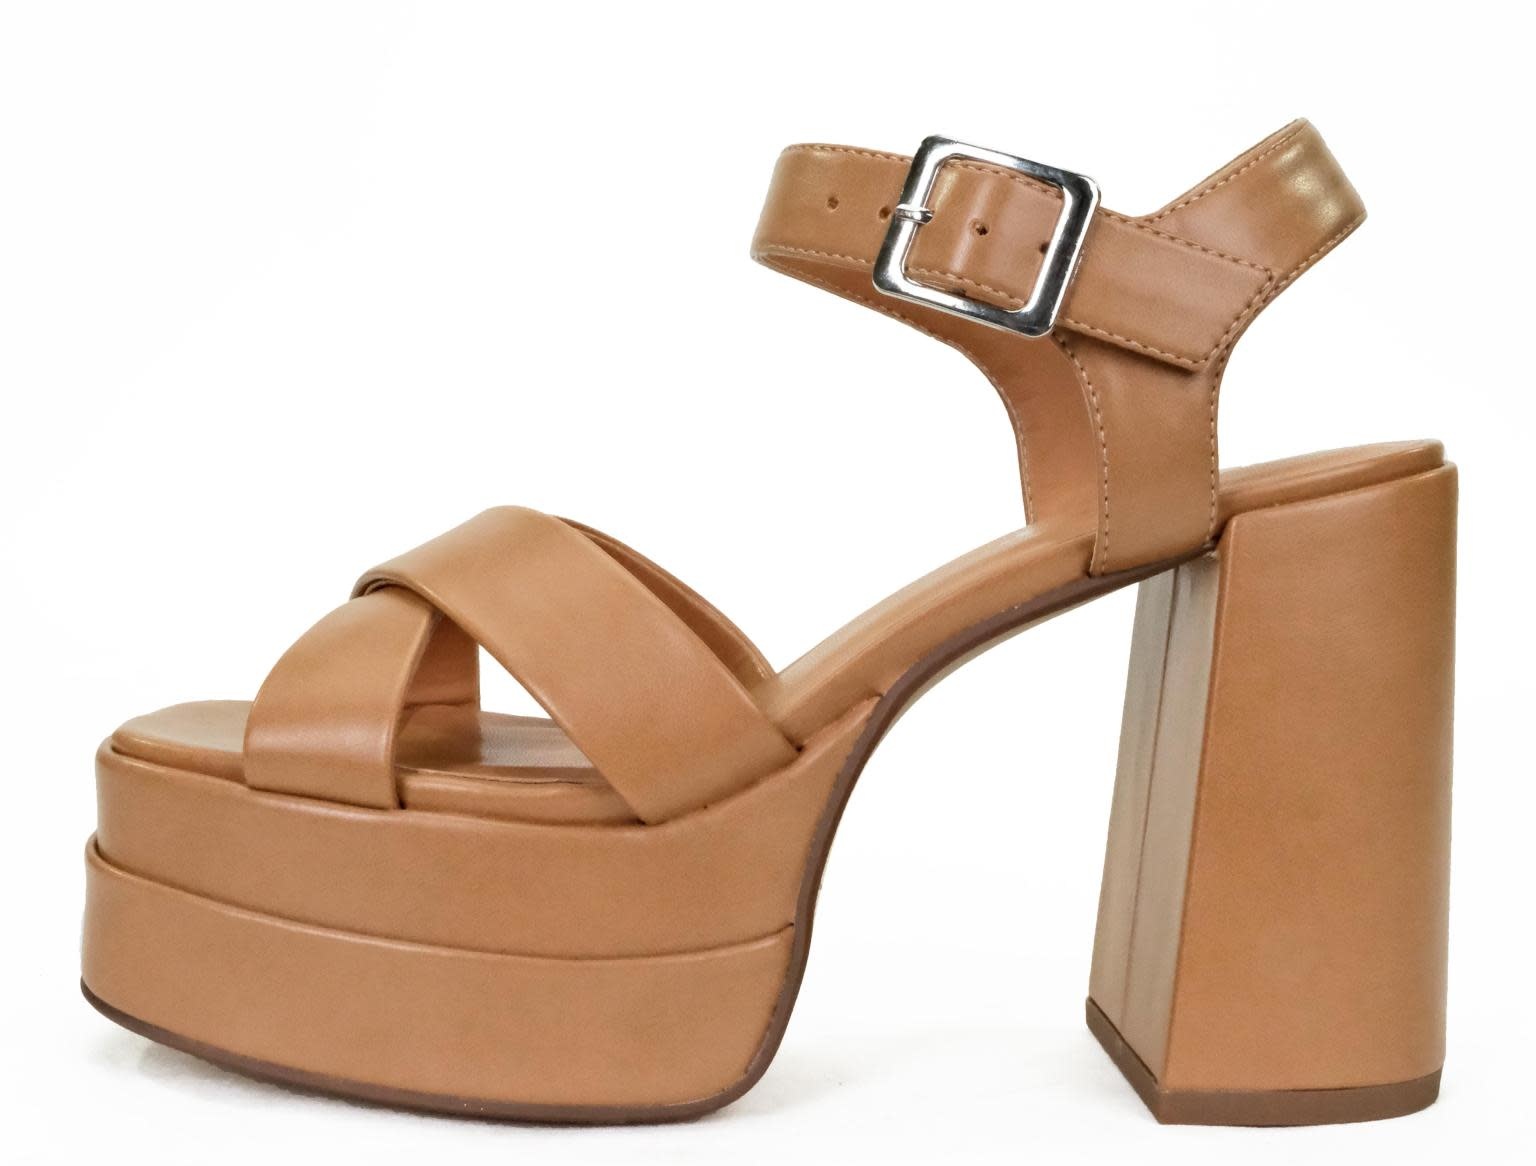 Chloé Duo Color Open Toe Ankle Strap Sandals Camel Nude 42